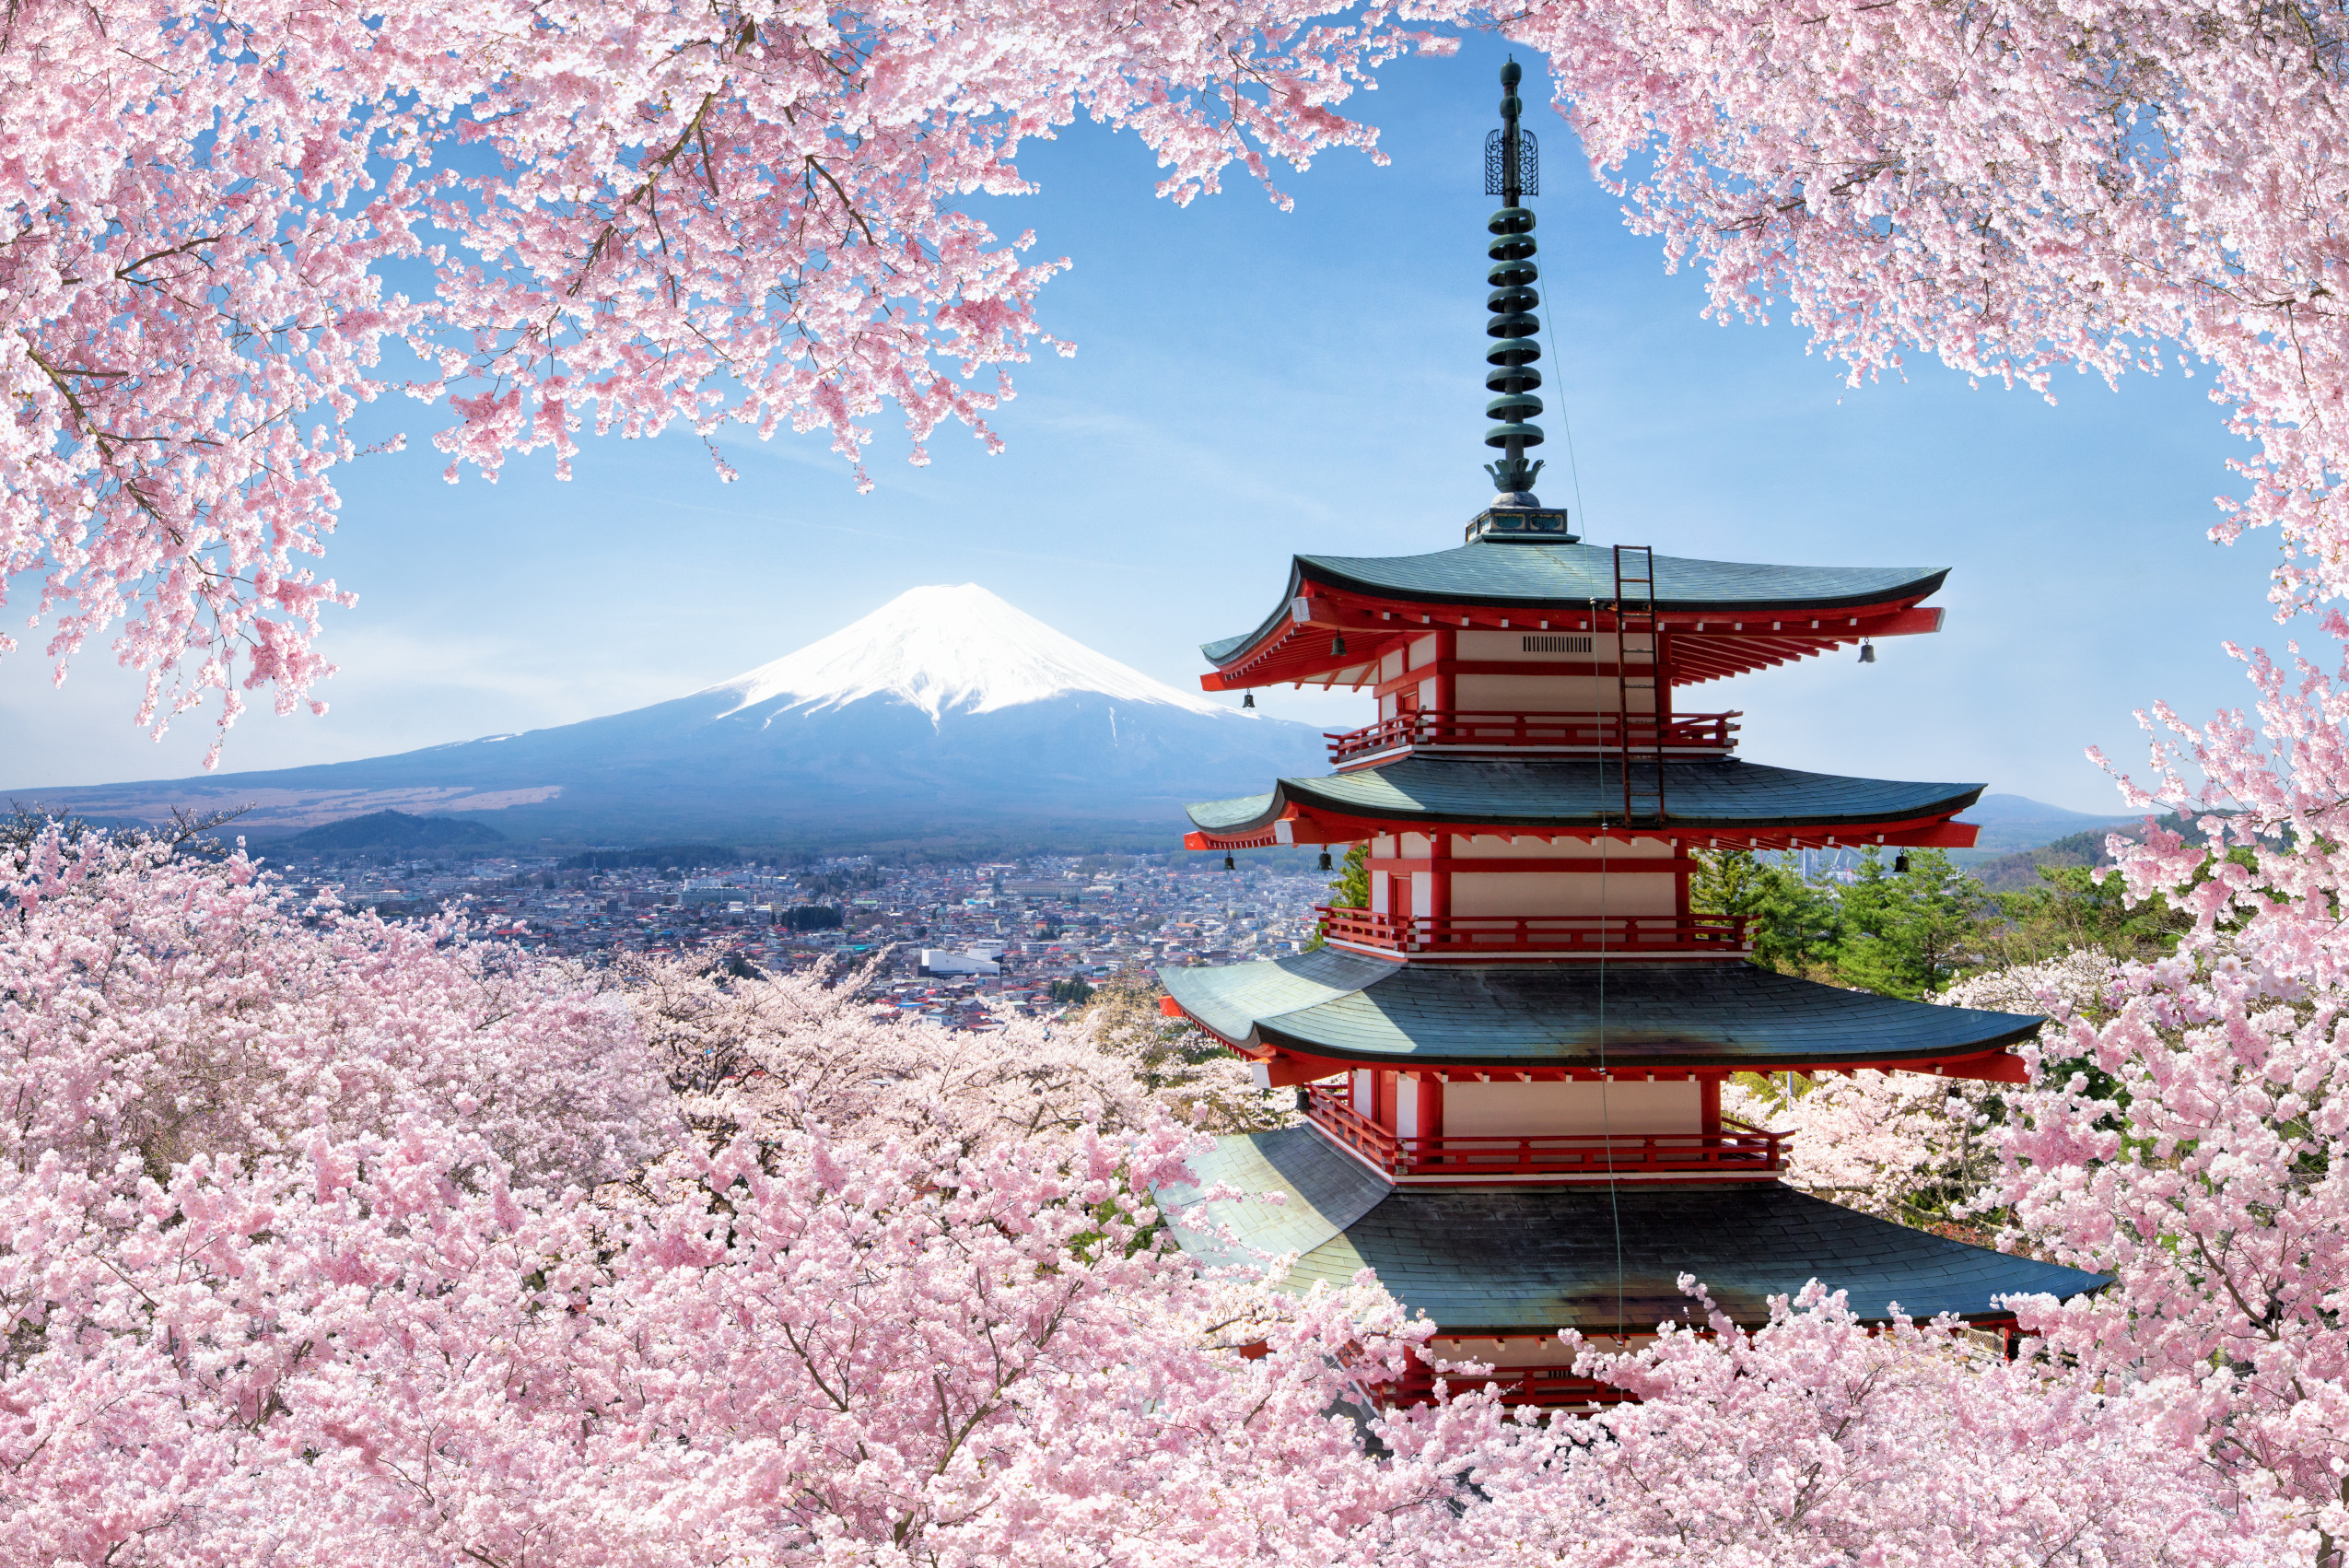 Cherry blossoms around Mount Fuji in Japan